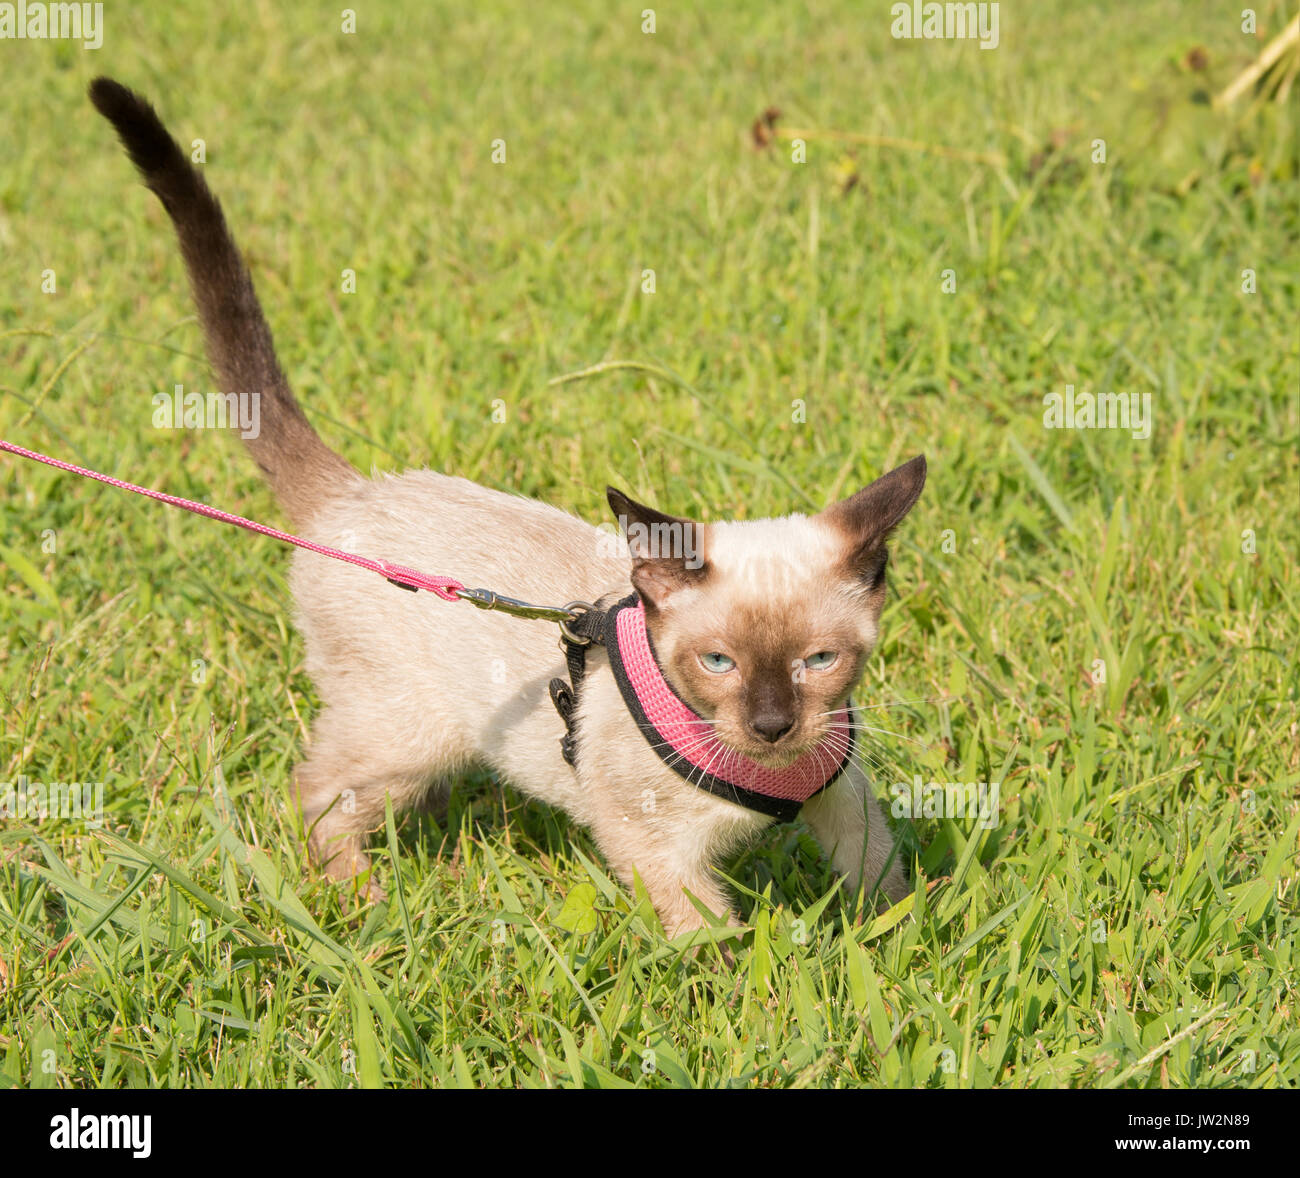 Siamese kitten walking on leash in a pink harness with green grass background Stock Photo